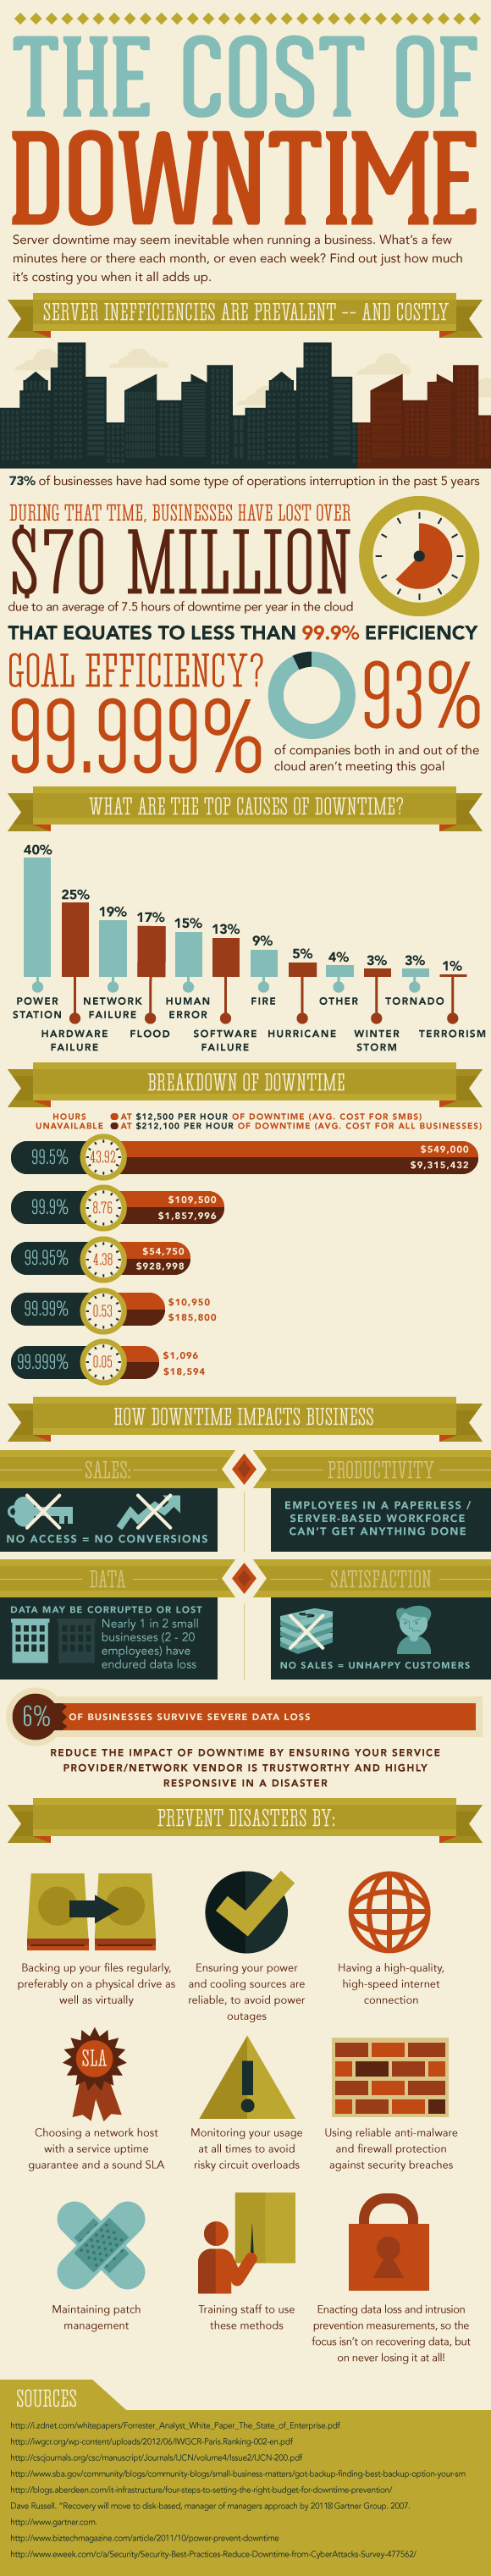 Infographic about the business cost of internet downtime